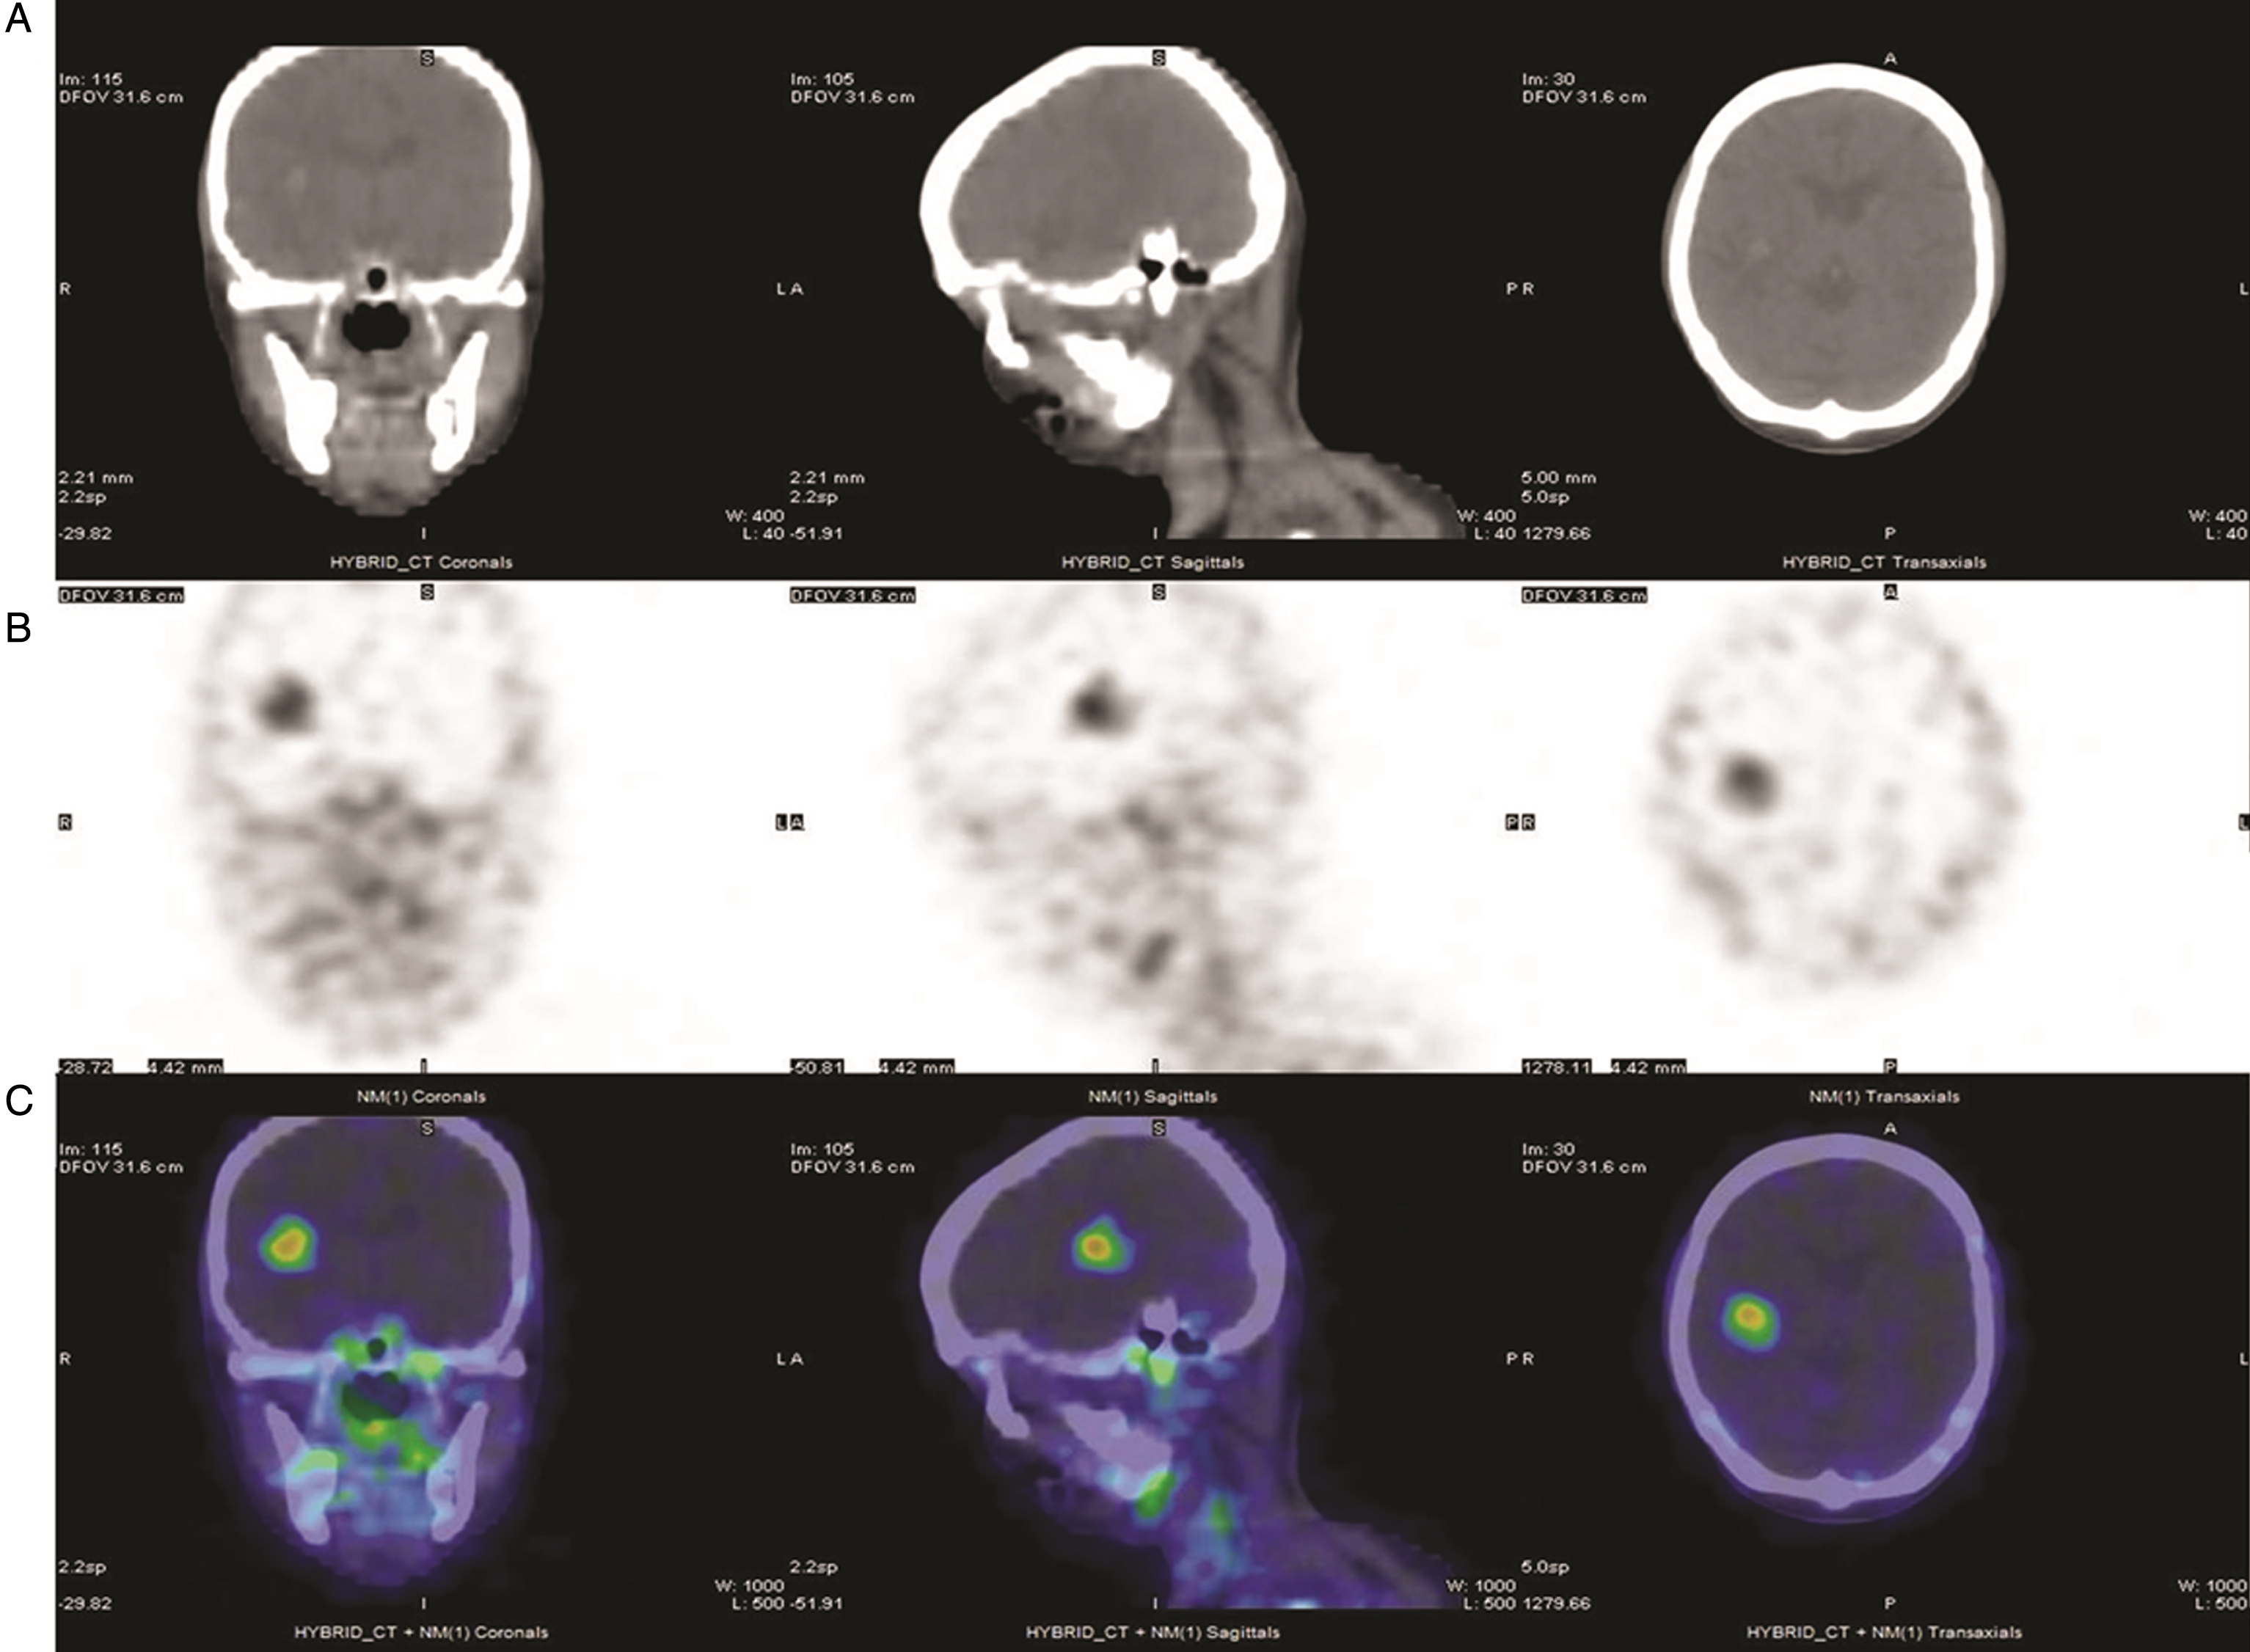 111In-J591 single-photon-emission tomography (SPECT) in a patient with metastatic bladder urothelial carcinoma (UC). From left to right: coronal, sagittal and transaxial views from SPECT/CT obtained 72 hours after the administration of 5.55 mCi In-111 DOTA J-591. (A) CT images of the head showing a focal hyperintense lesion with surrounding edema in the right hemisphere. (B) SPECT images of the head in grayscale and (C) in color scale, showing multiple foci of increased uptake in the brain, skull, mandibles and cervical nodes.